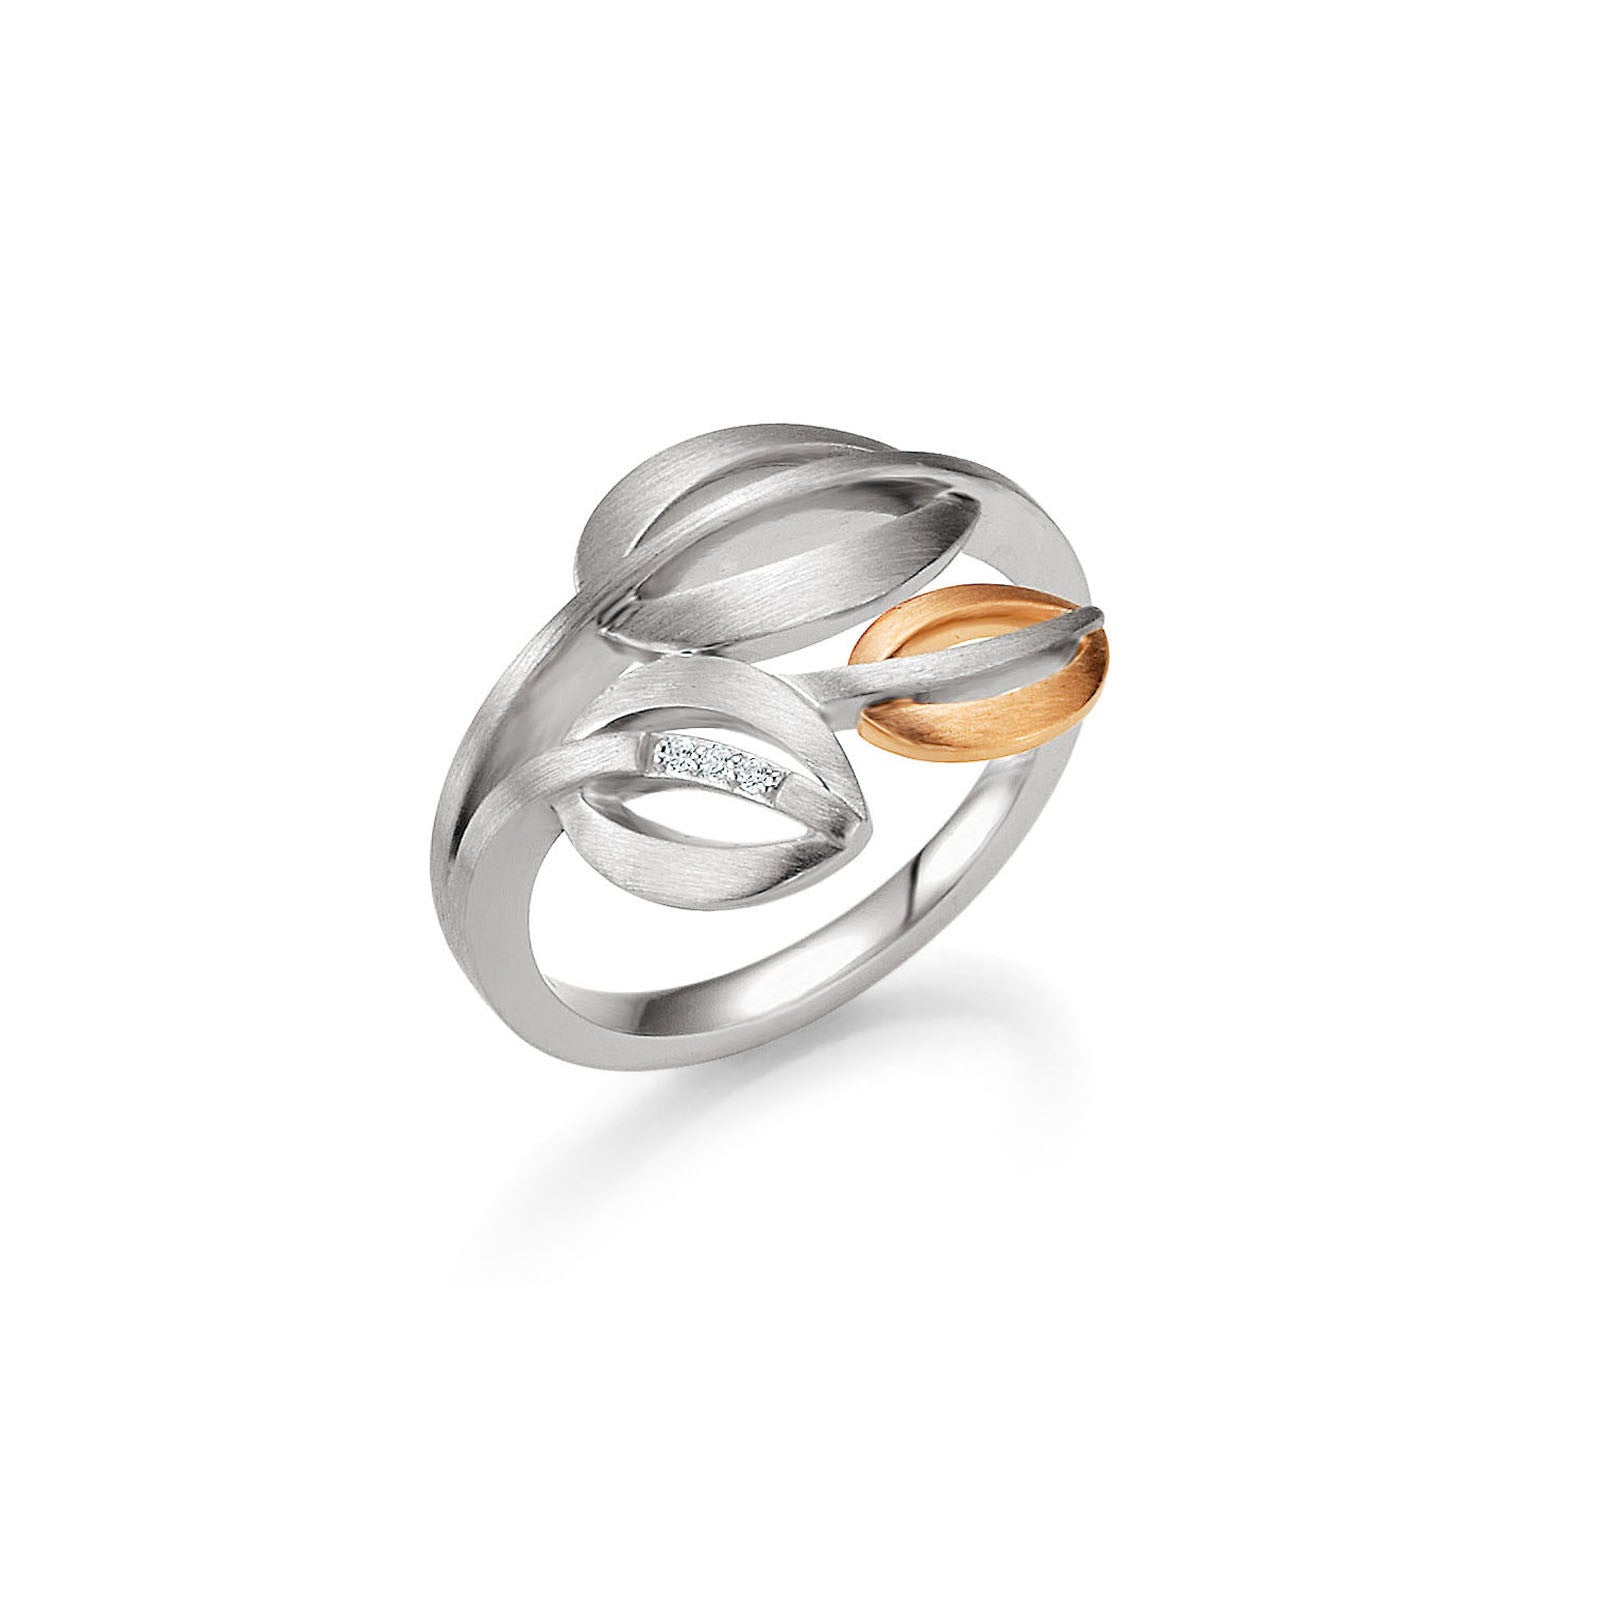 Sterling Silver, White Sapphire and 14k Rose Gold Accent Ring by Breuning